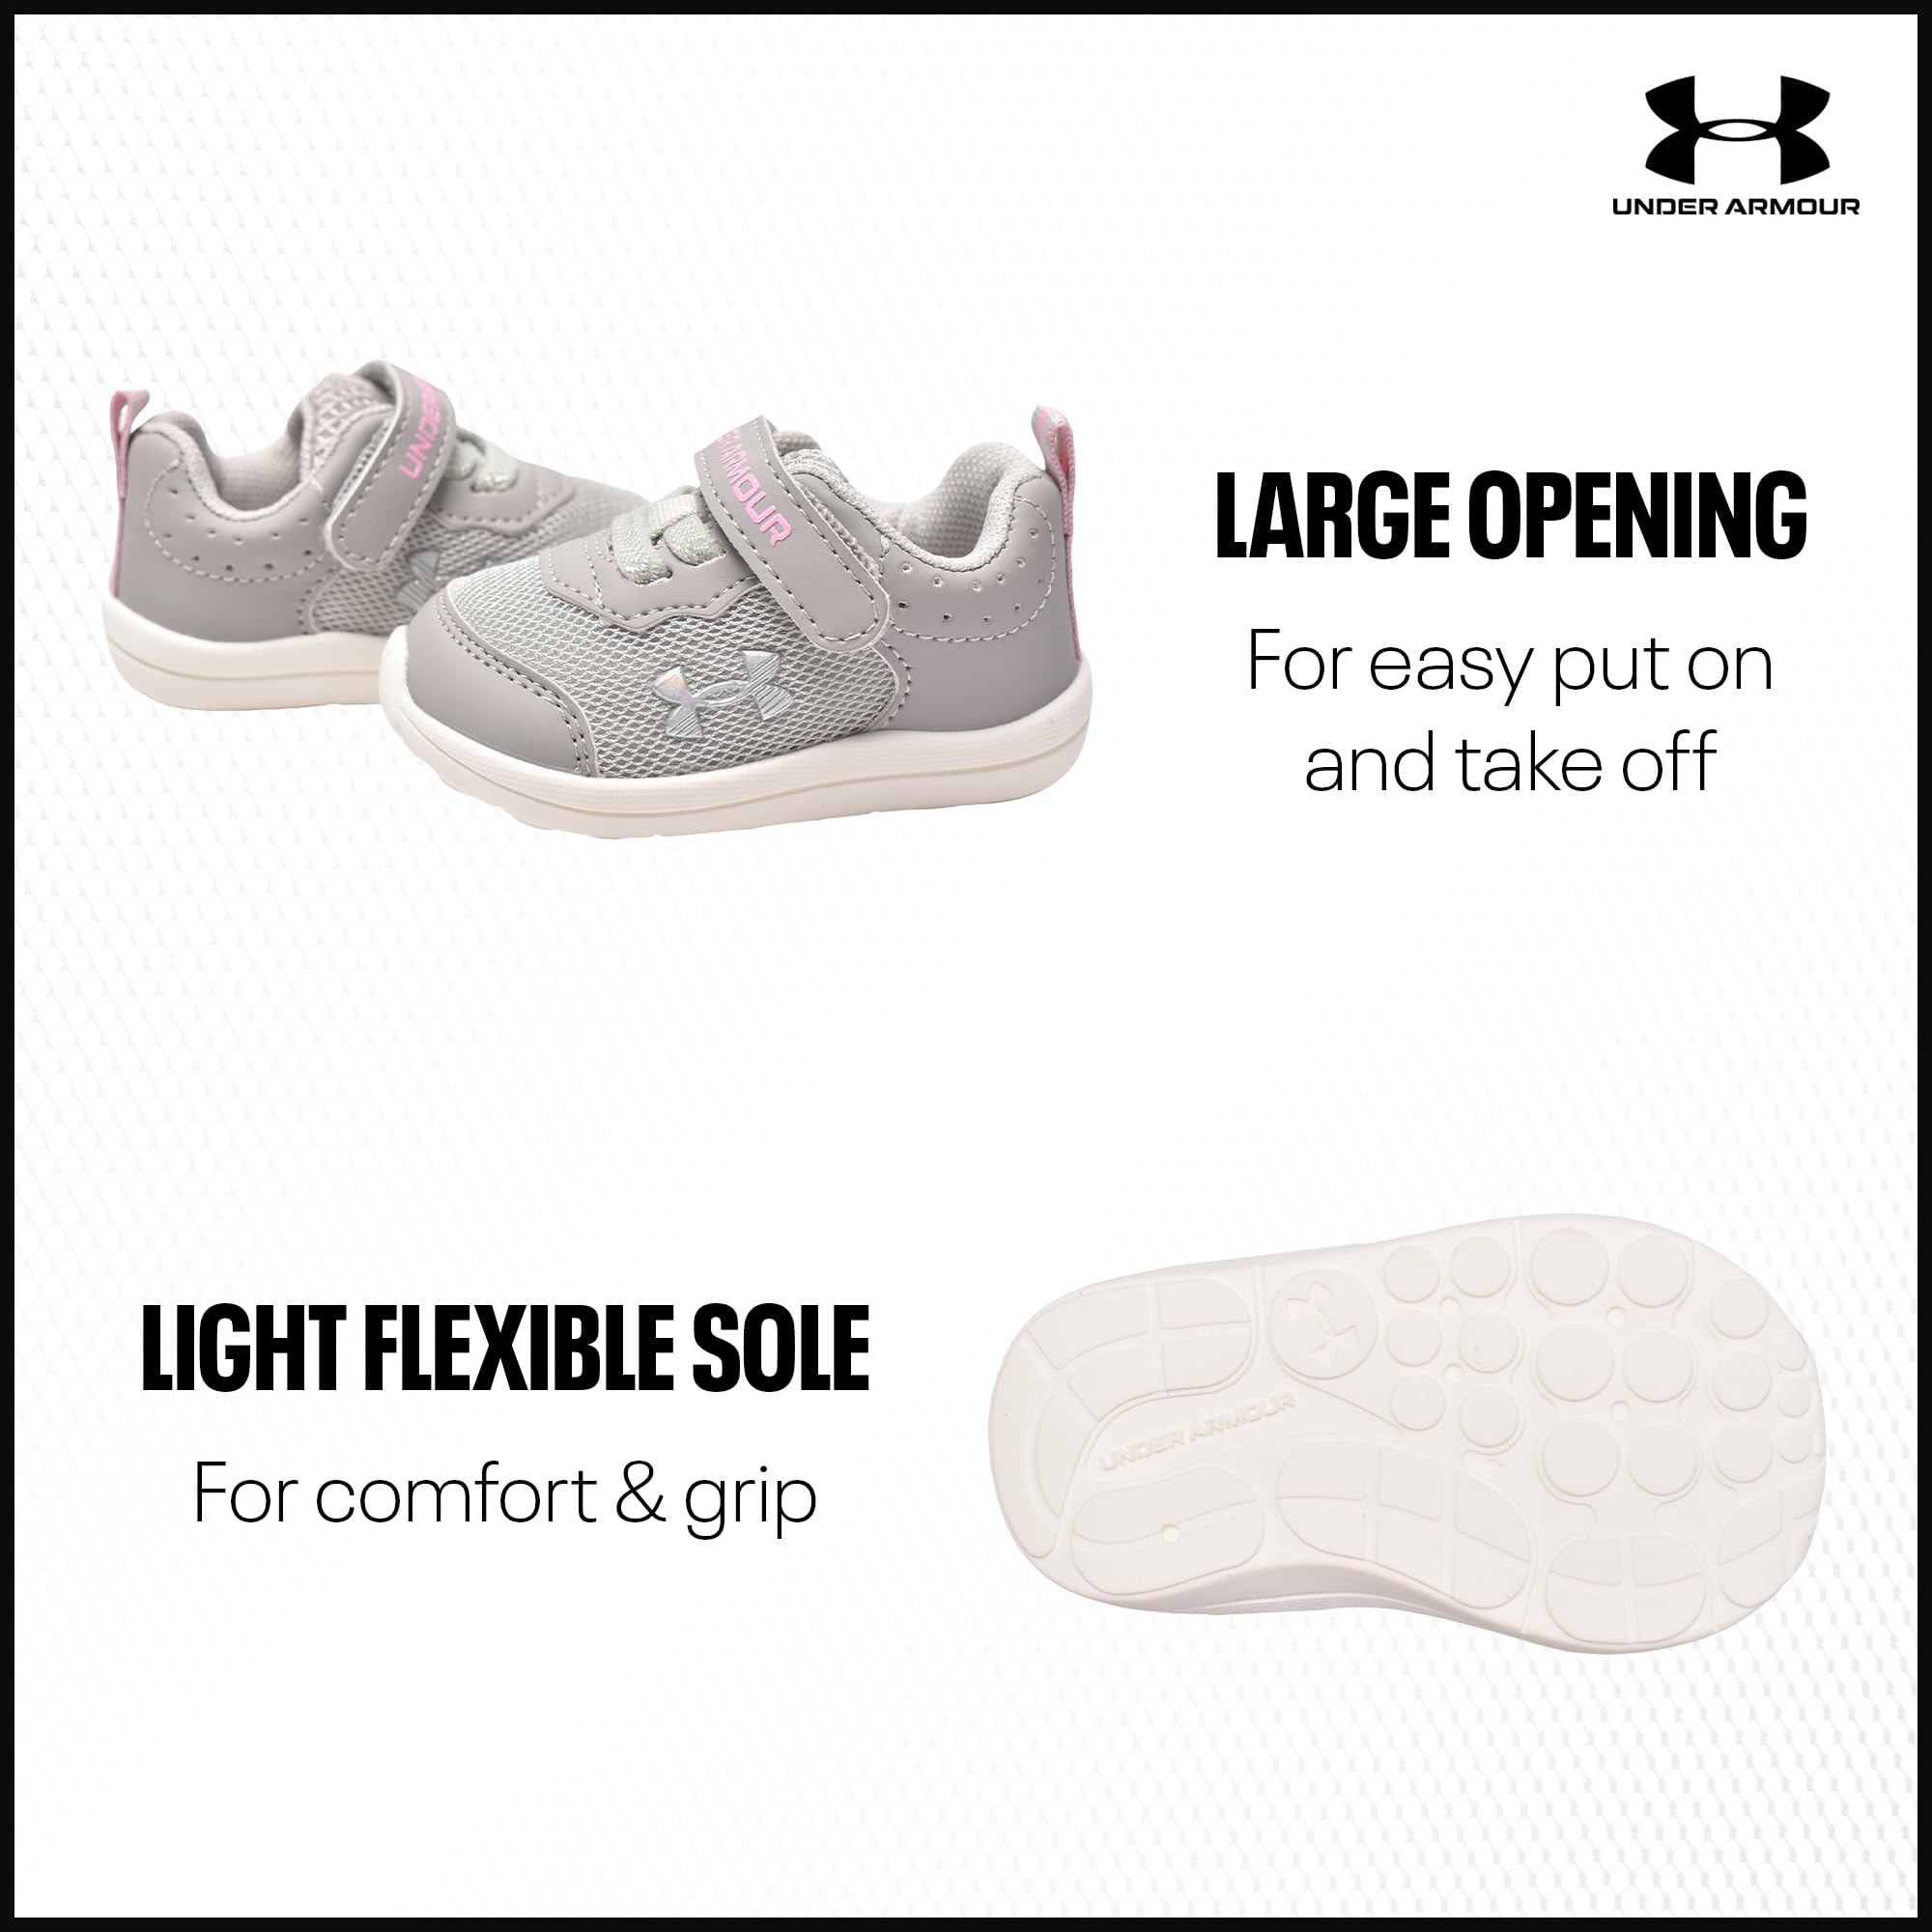 Under Armour Baby Crib Shoes